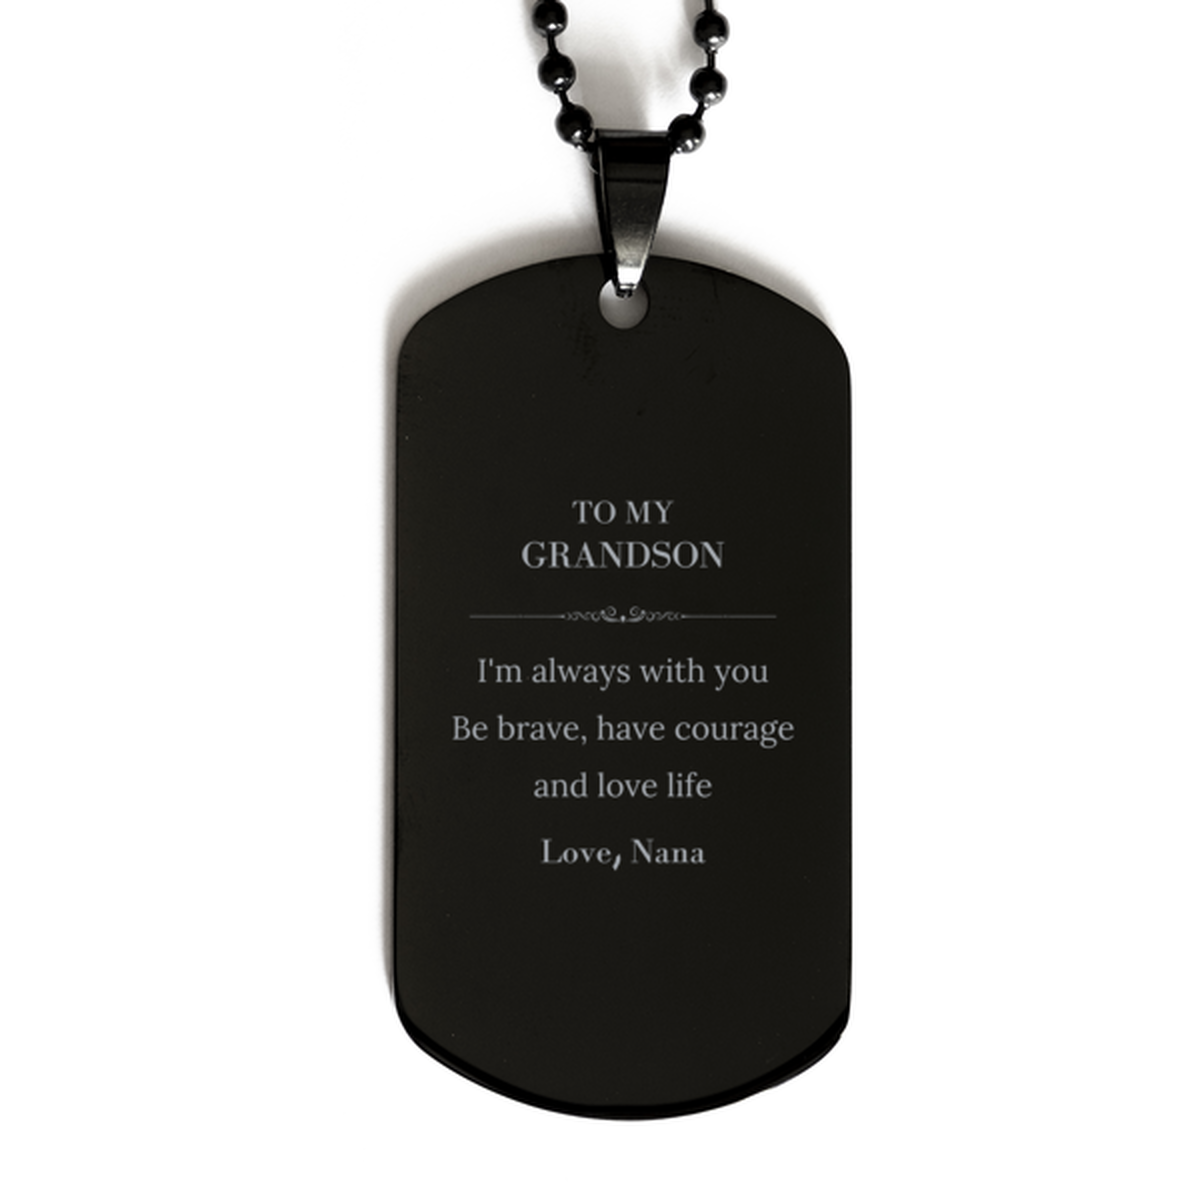 To My Grandson Gifts from Nana, Unique Black Dog Tag Inspirational Christmas Birthday Graduation Gifts for Grandson I'm always with you. Be brave, have courage and love life. Love, Nana